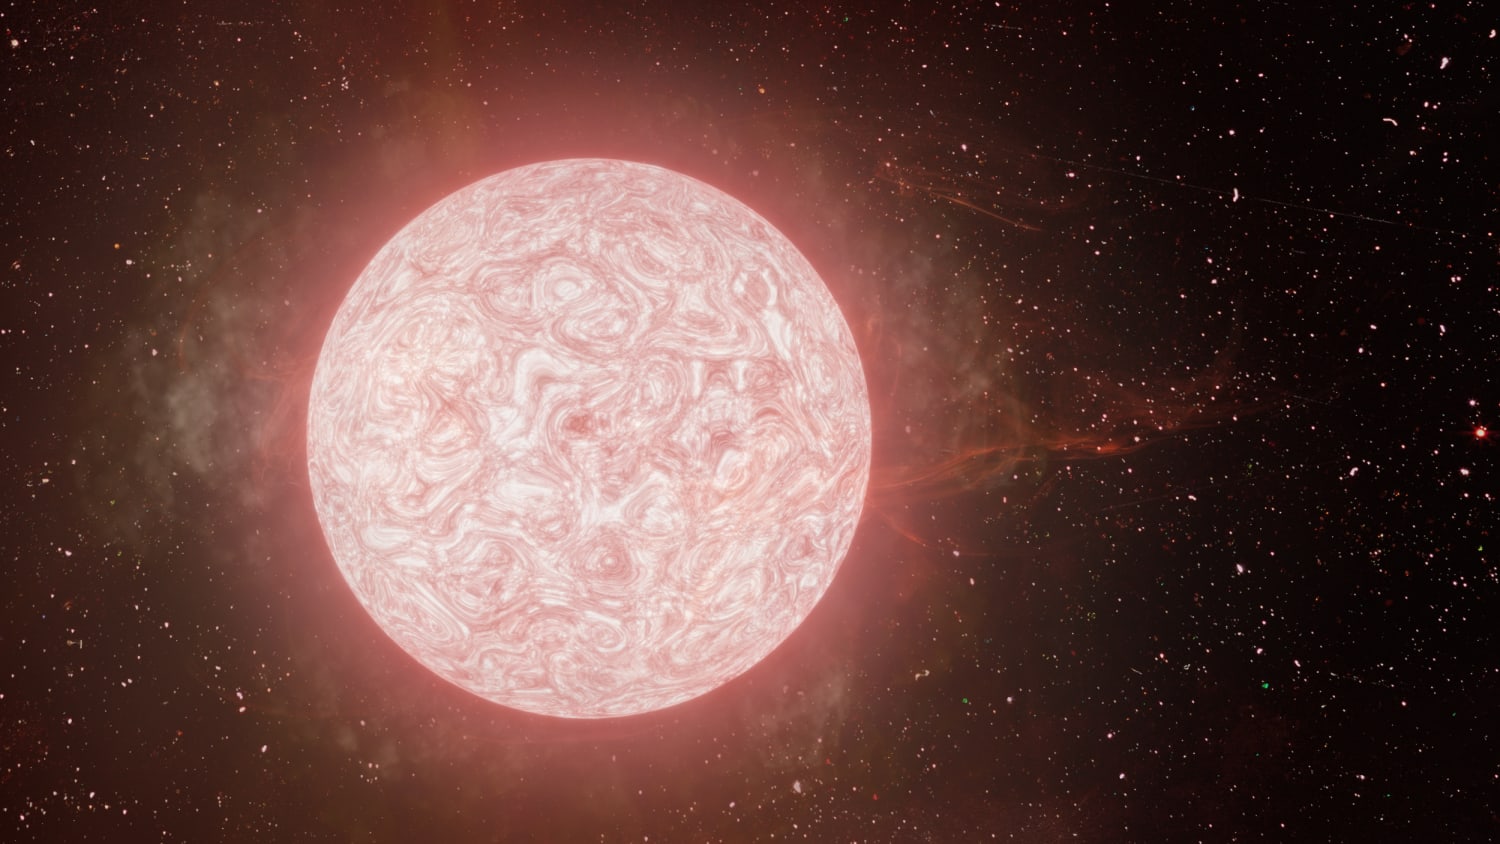 Astronomers witness the explosive death of a giant star for first time